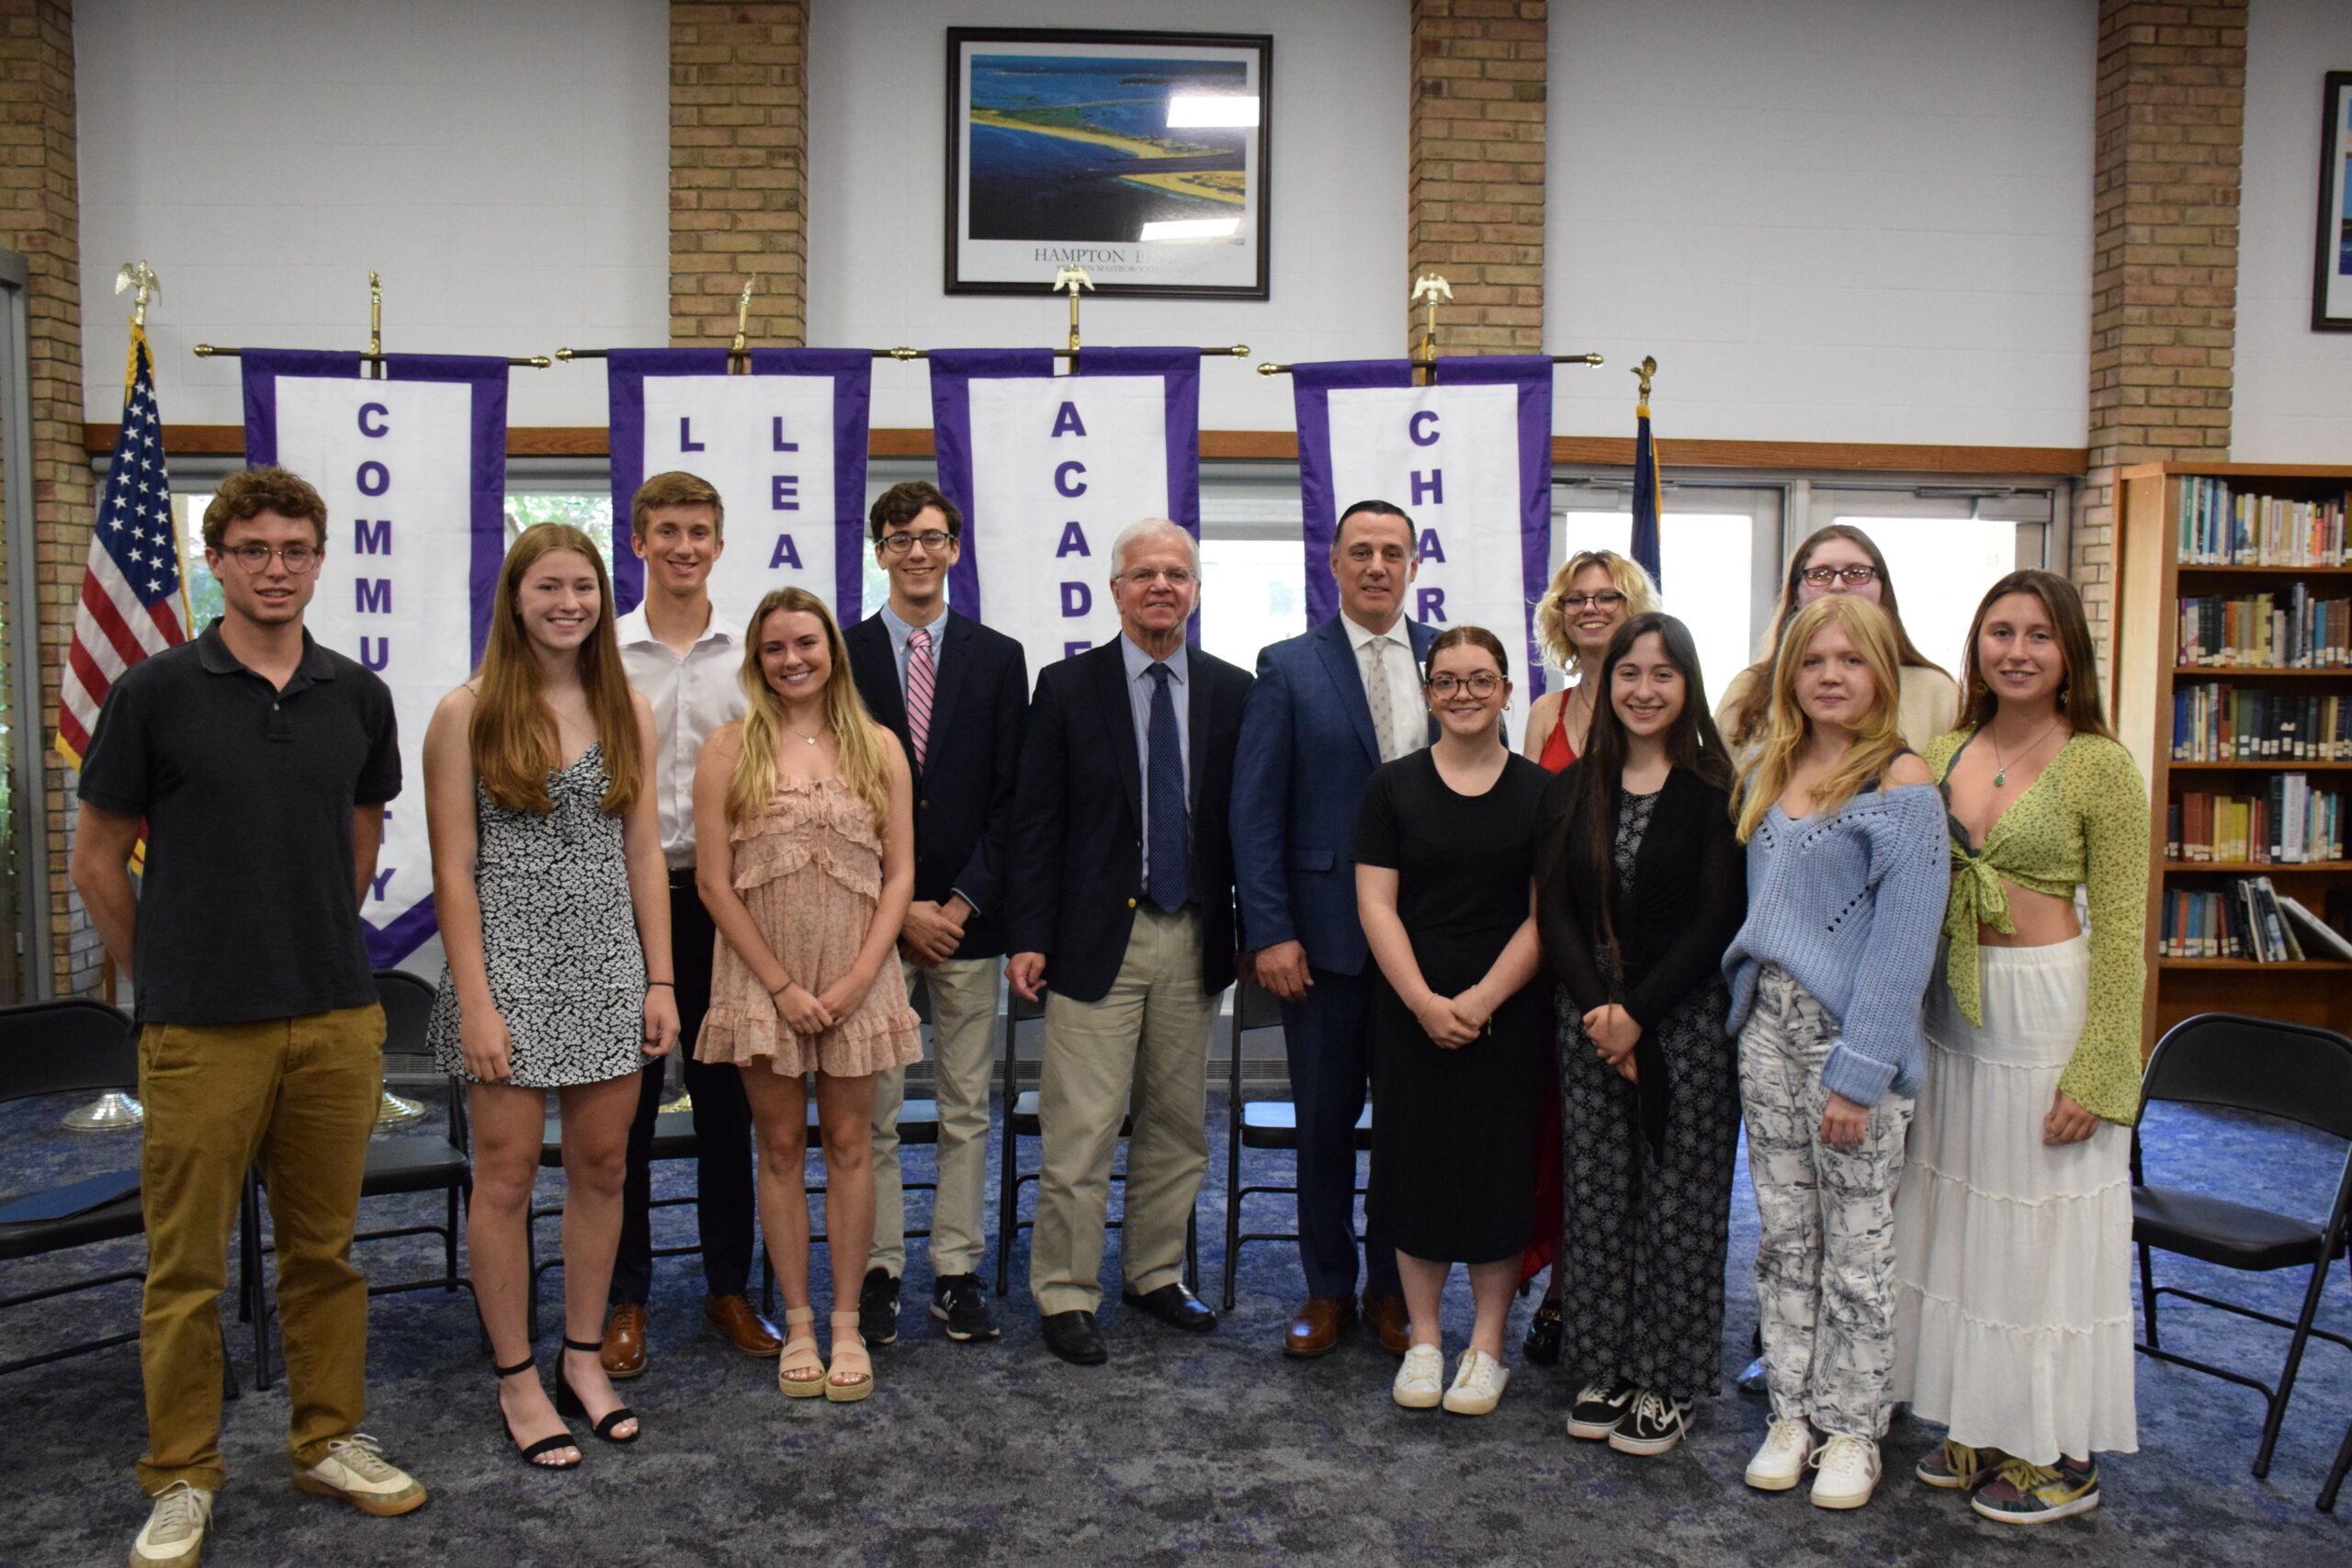 New York State Senator Anthony Palumbo and Assemblyman Fred Thiele paid tribute to Class of 2022 valedictorians and salutatorians from six East End schools during a ceremony at Hampton Bays High School on June 6. The top-ranking seniors were presented with proclamations for their hard work and dedication. They represented the Bridgehampton, East Hampton, Hampton Bays, Sag Harbor, Shoreham-Wading River and Westhampton Beach school districts.